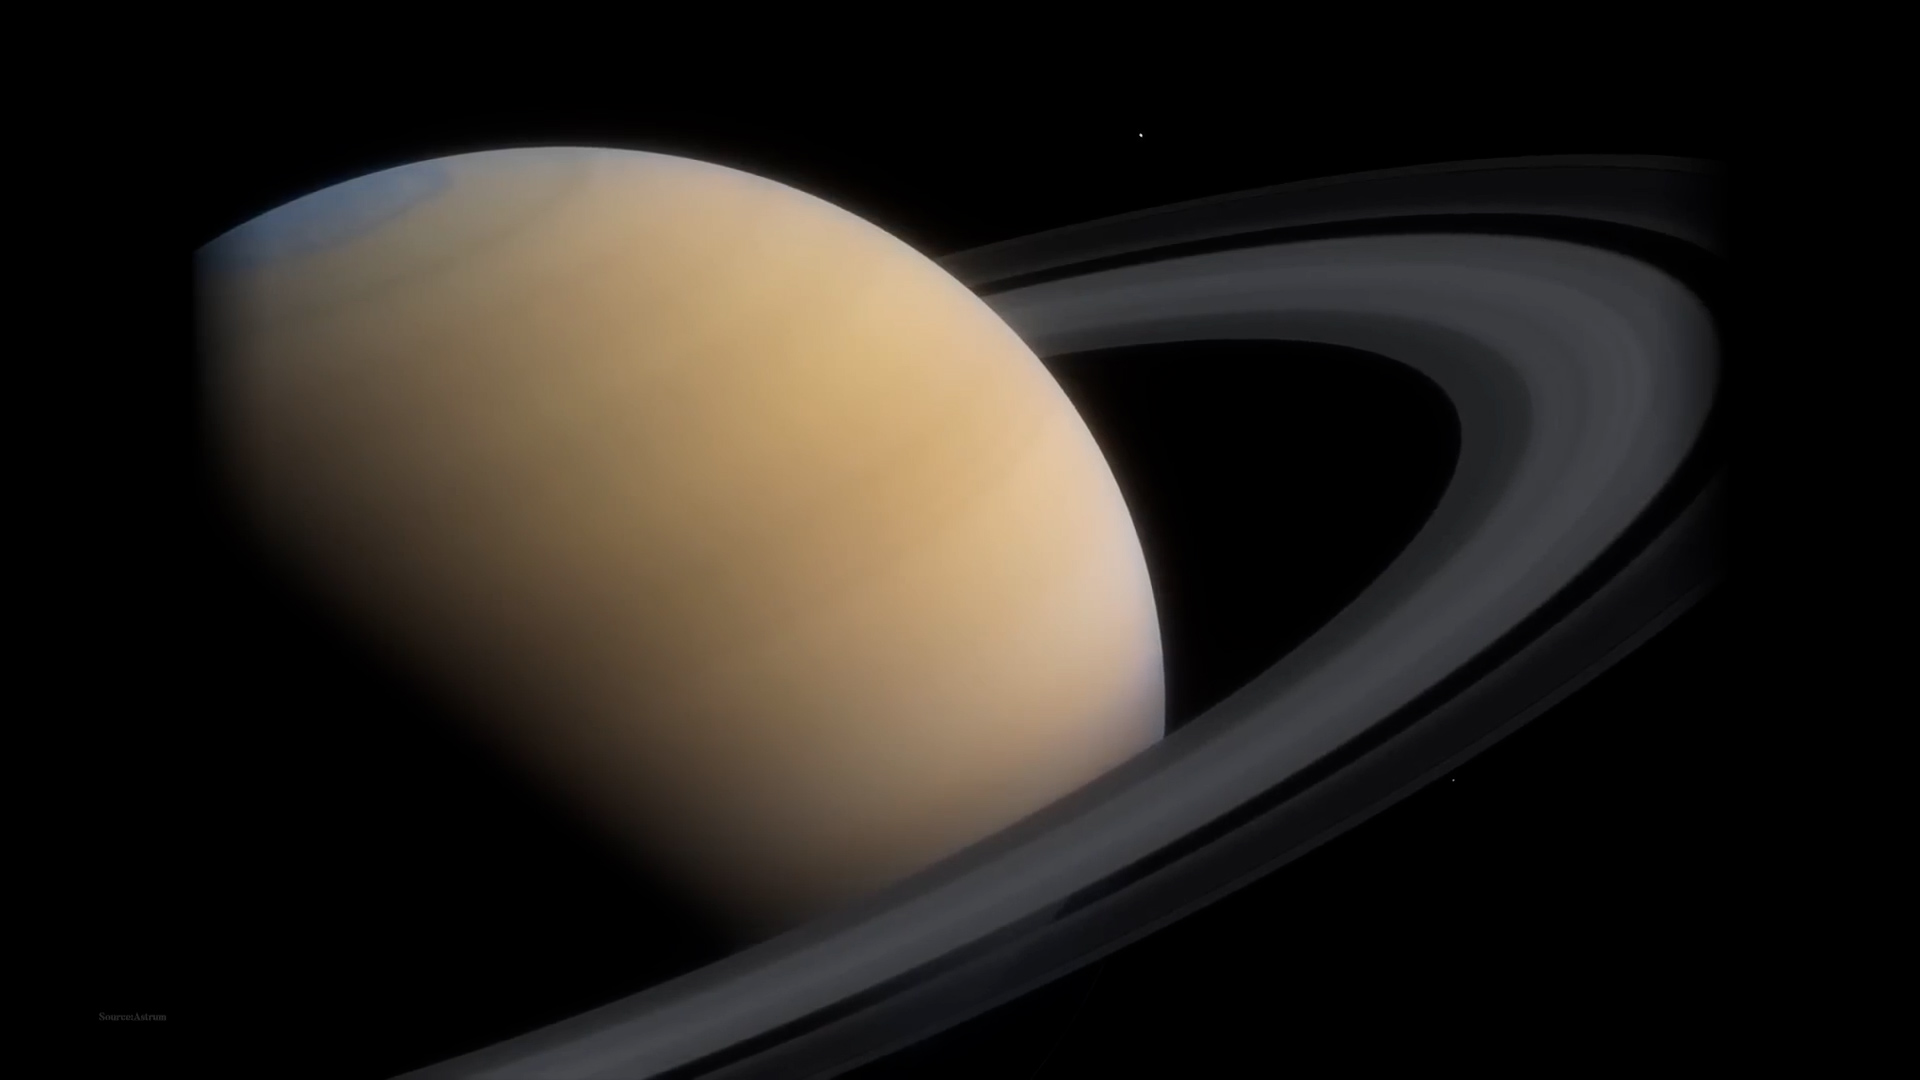 Sturn’s ring will disappear from view in March 2025, NASA says. Scientists claim Saturn’s rings will disappear soon.